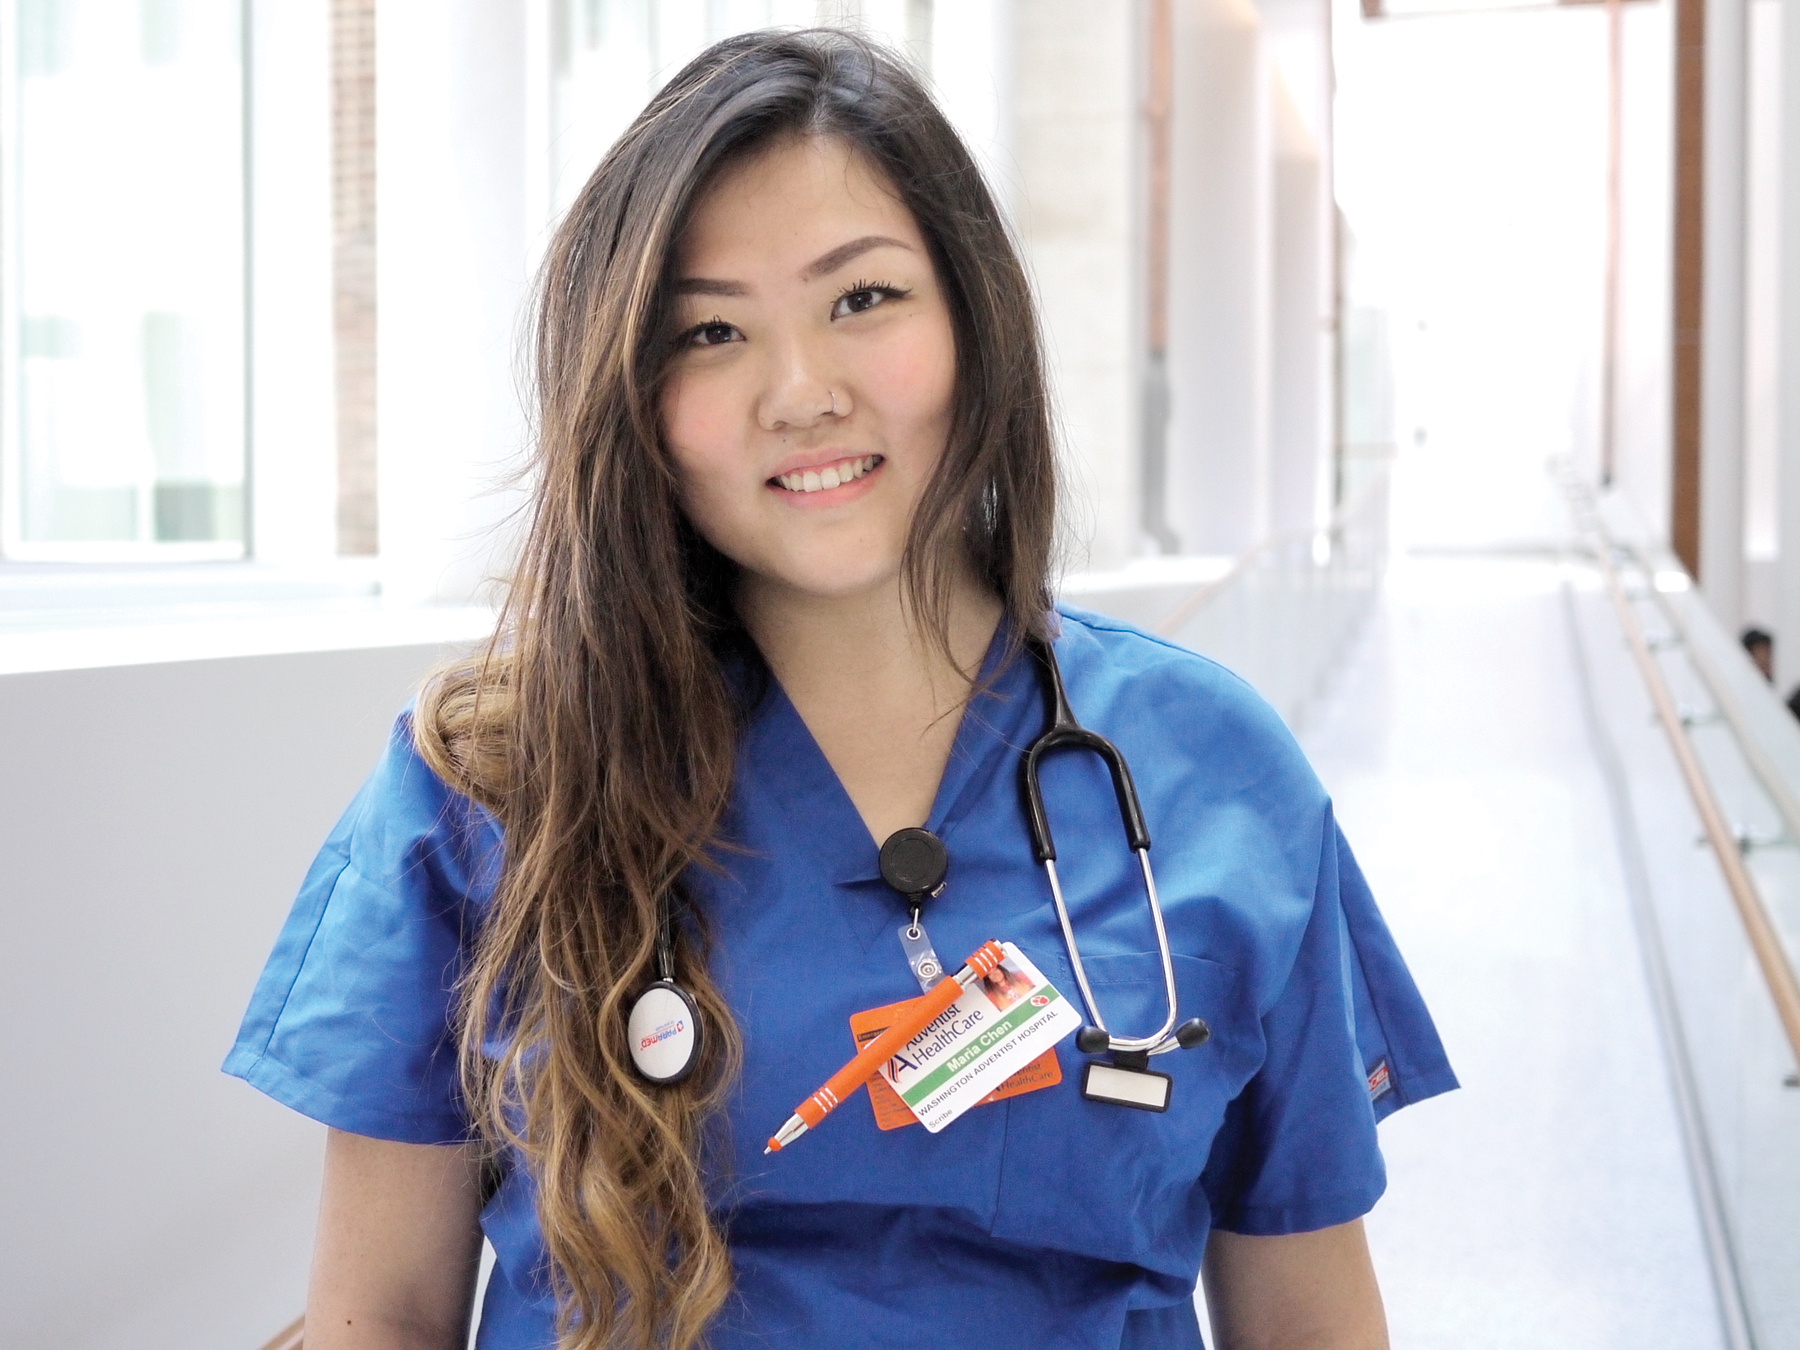 Maria Chen wearing blue scrubs and a stethoscope. She is standing at the head of a long, brightly-lit hall.